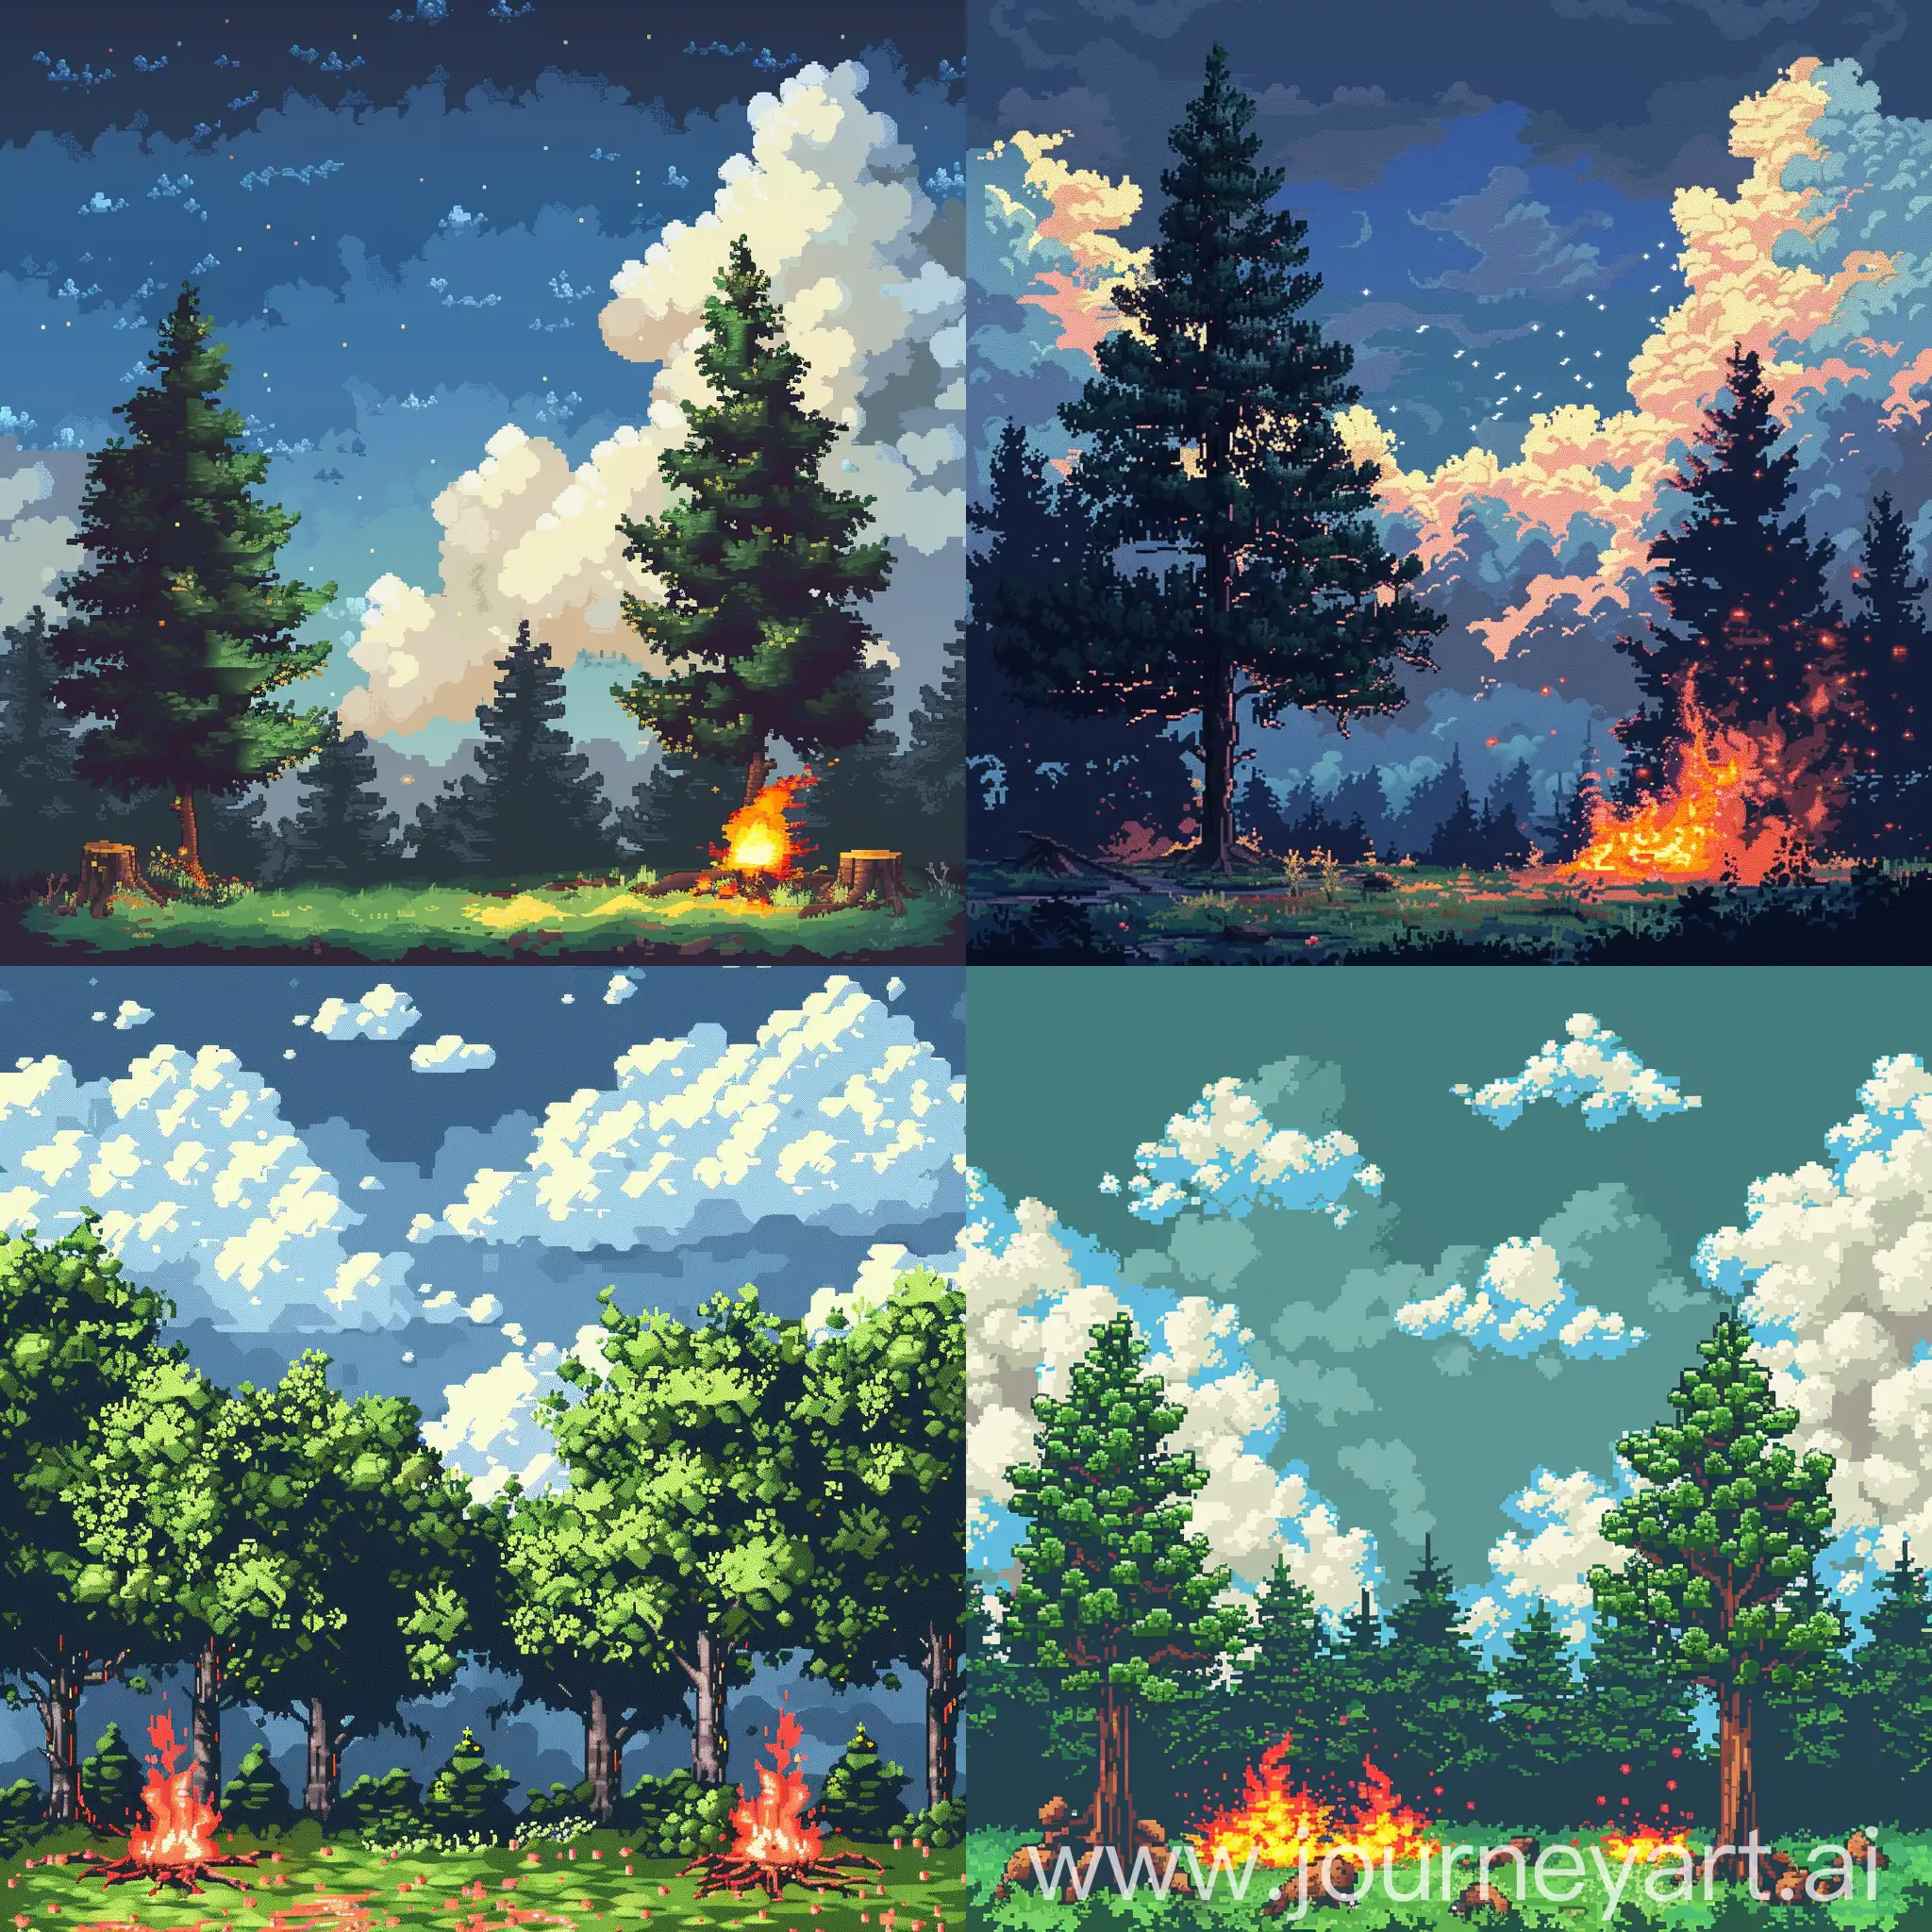 Pixel art animation image, with trees, nature, fire and relaxing clouds